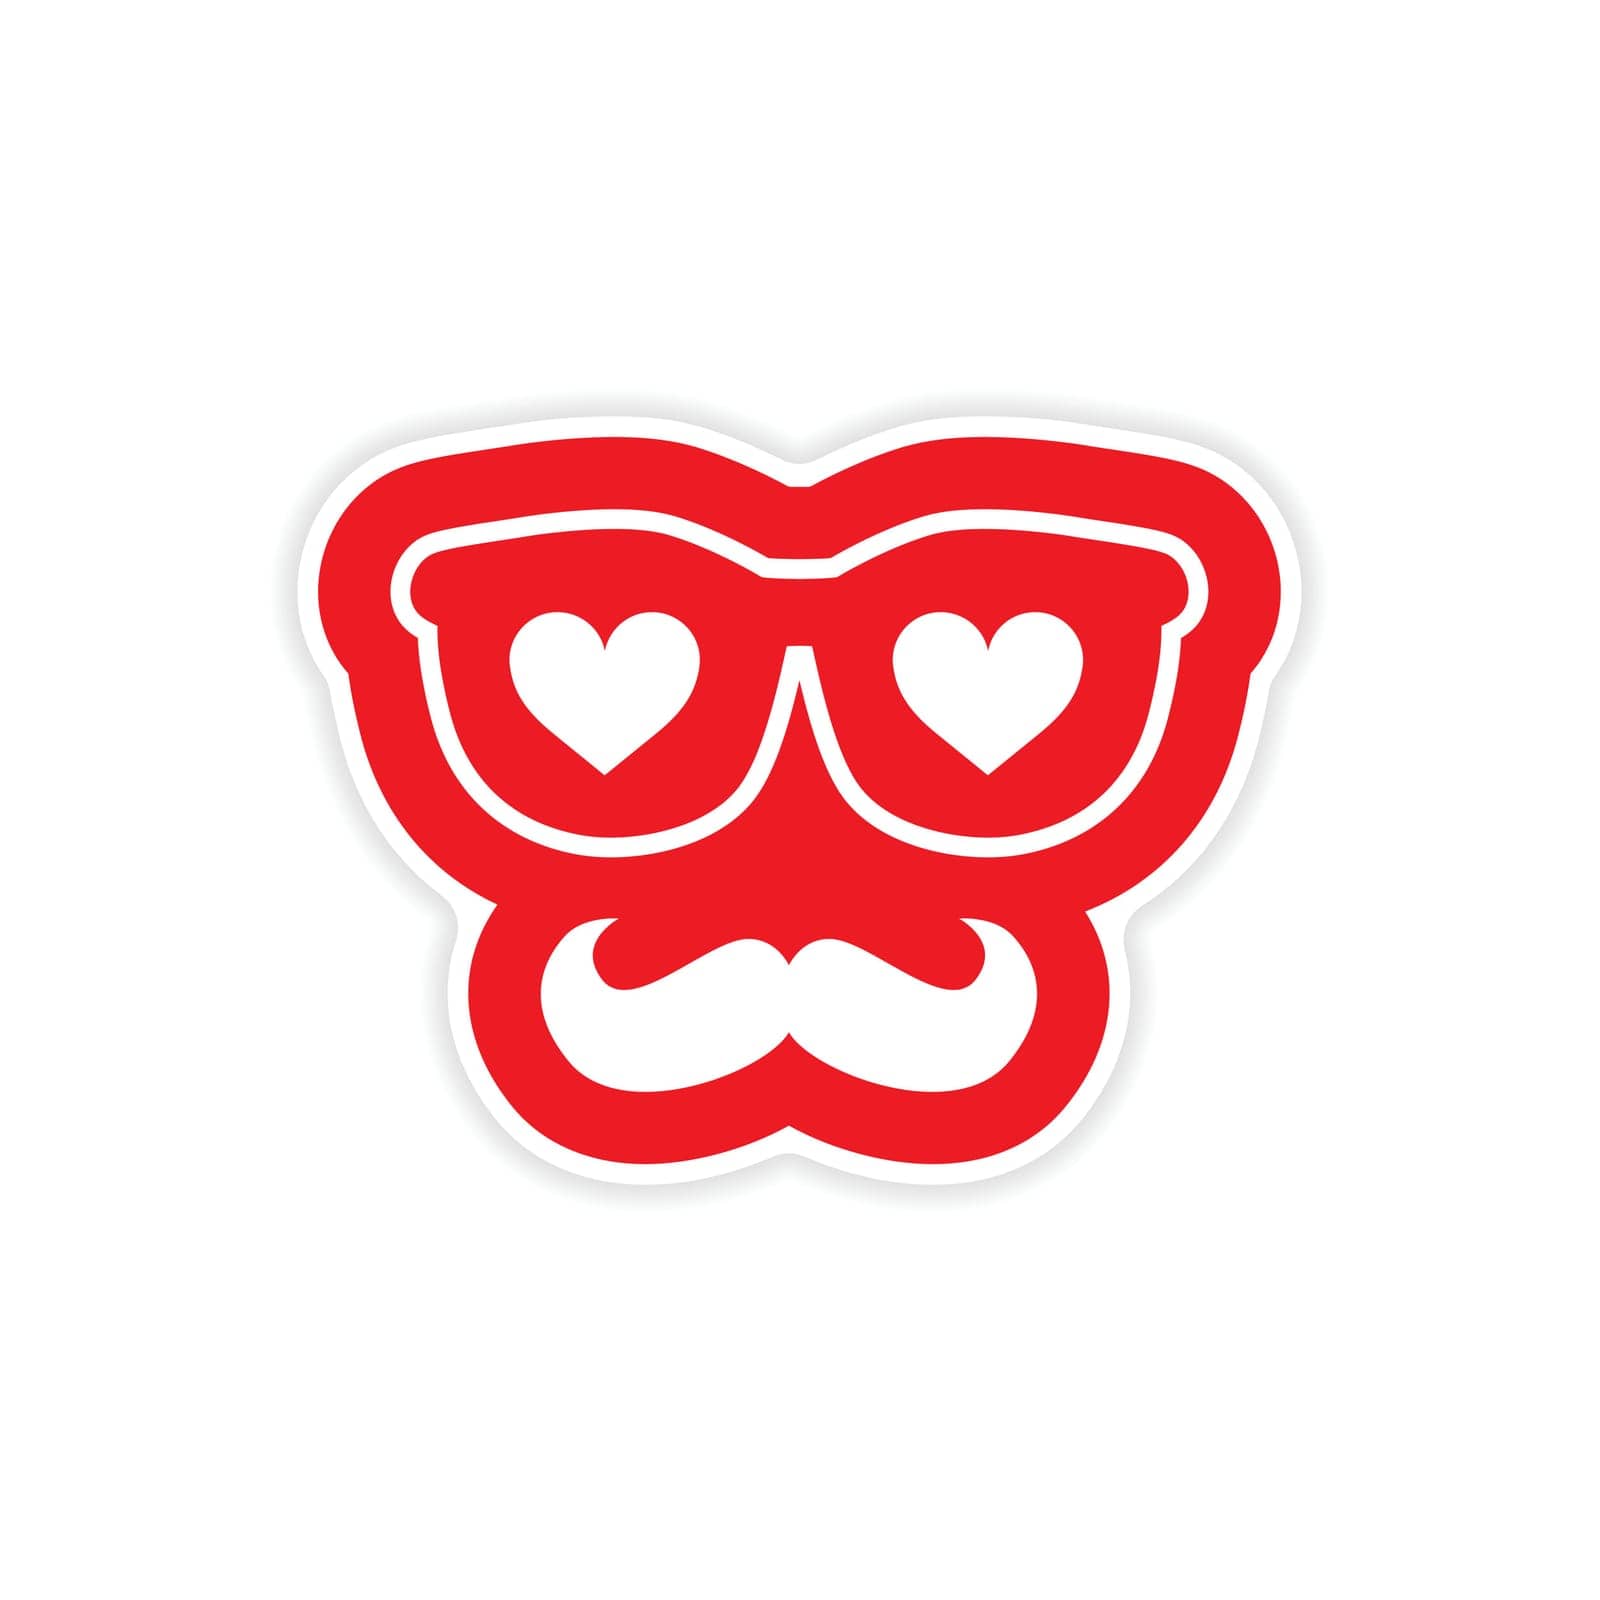 love,symbol,whisker,happy,greeting,pattern,hipster,wear,holiday,mustache,glasses,white,paper,design,wayfarer,day,shape,old,sticker,valentine,fashionable,heart,conceptual,stylish,background,vintage,silhouette,style,accessory,fashion